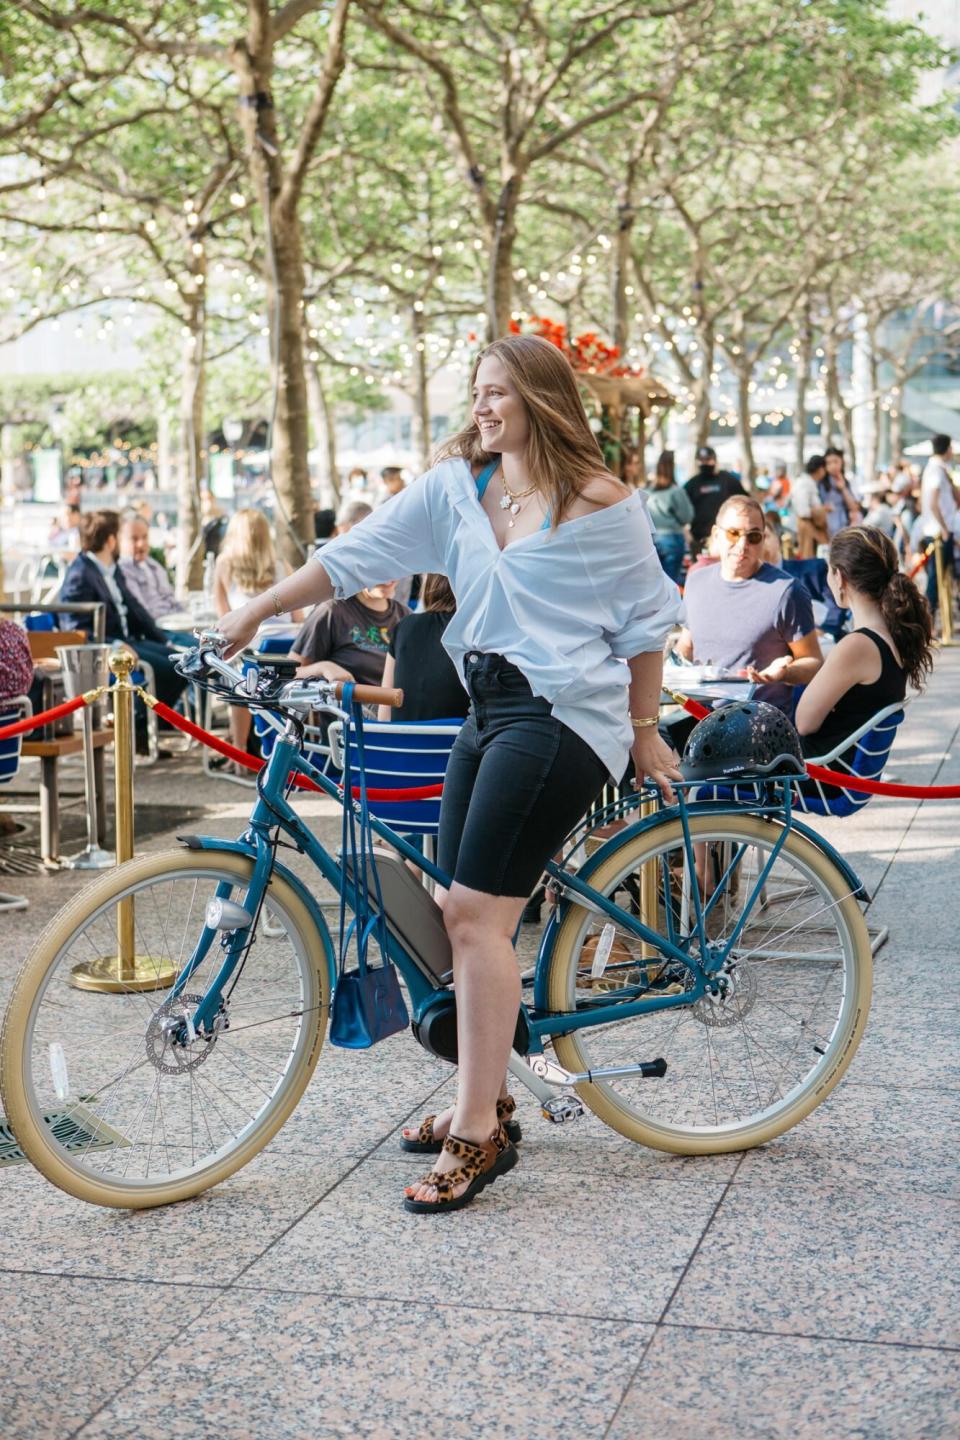 How to Look Cute on a Bike without Really Trying